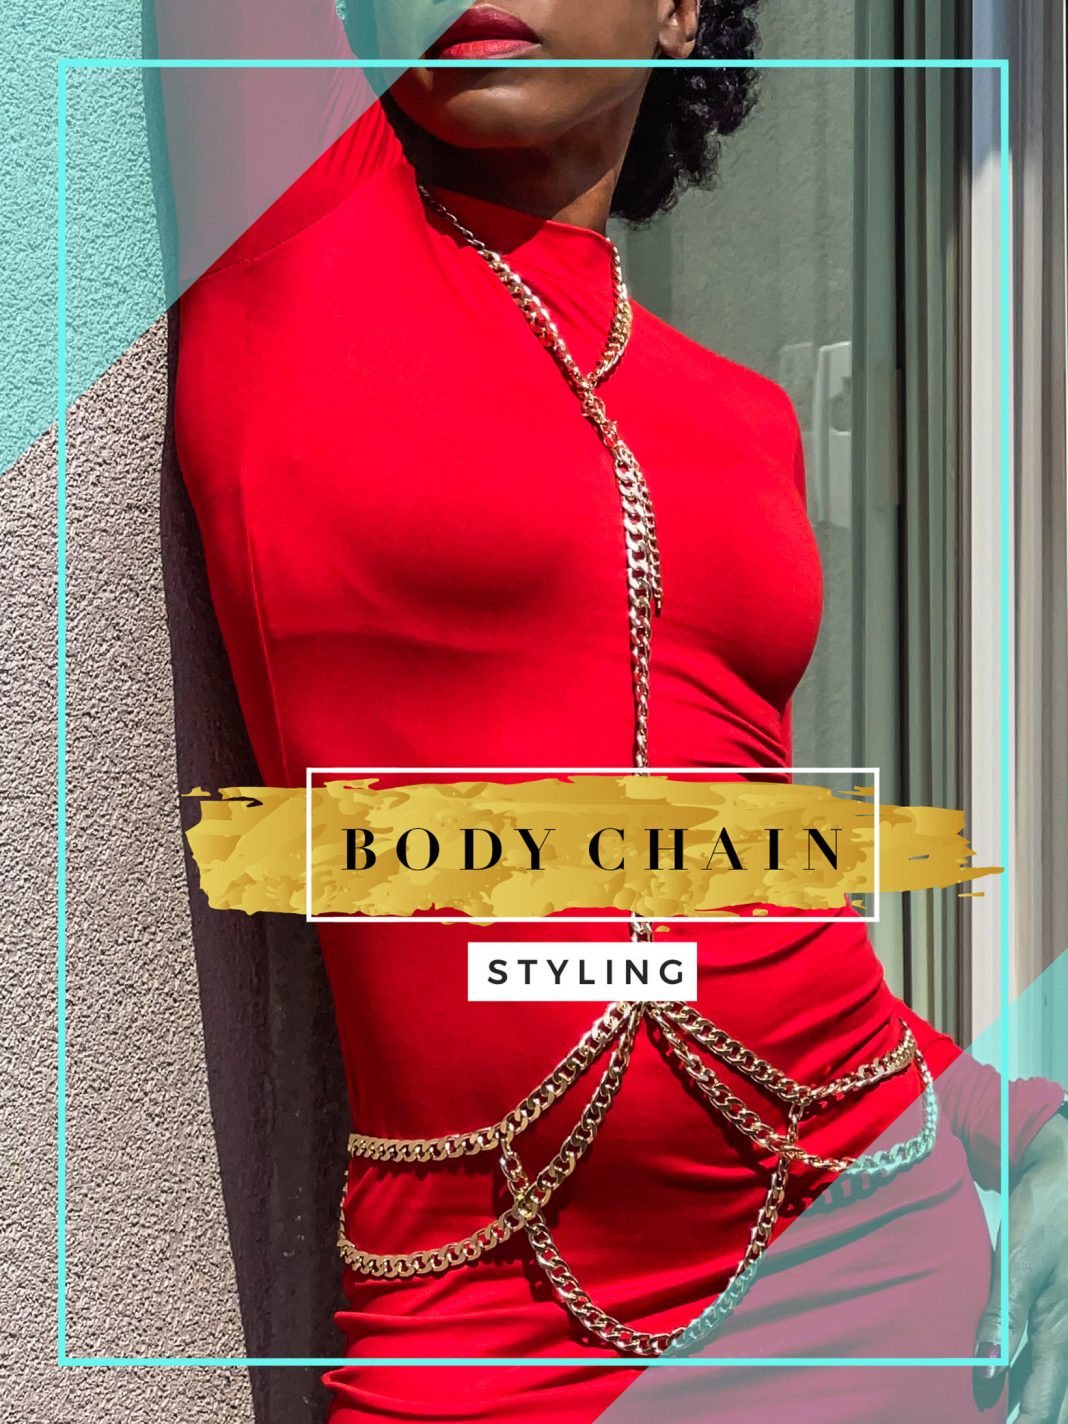 Fashionnova body chain styling over clothes looks